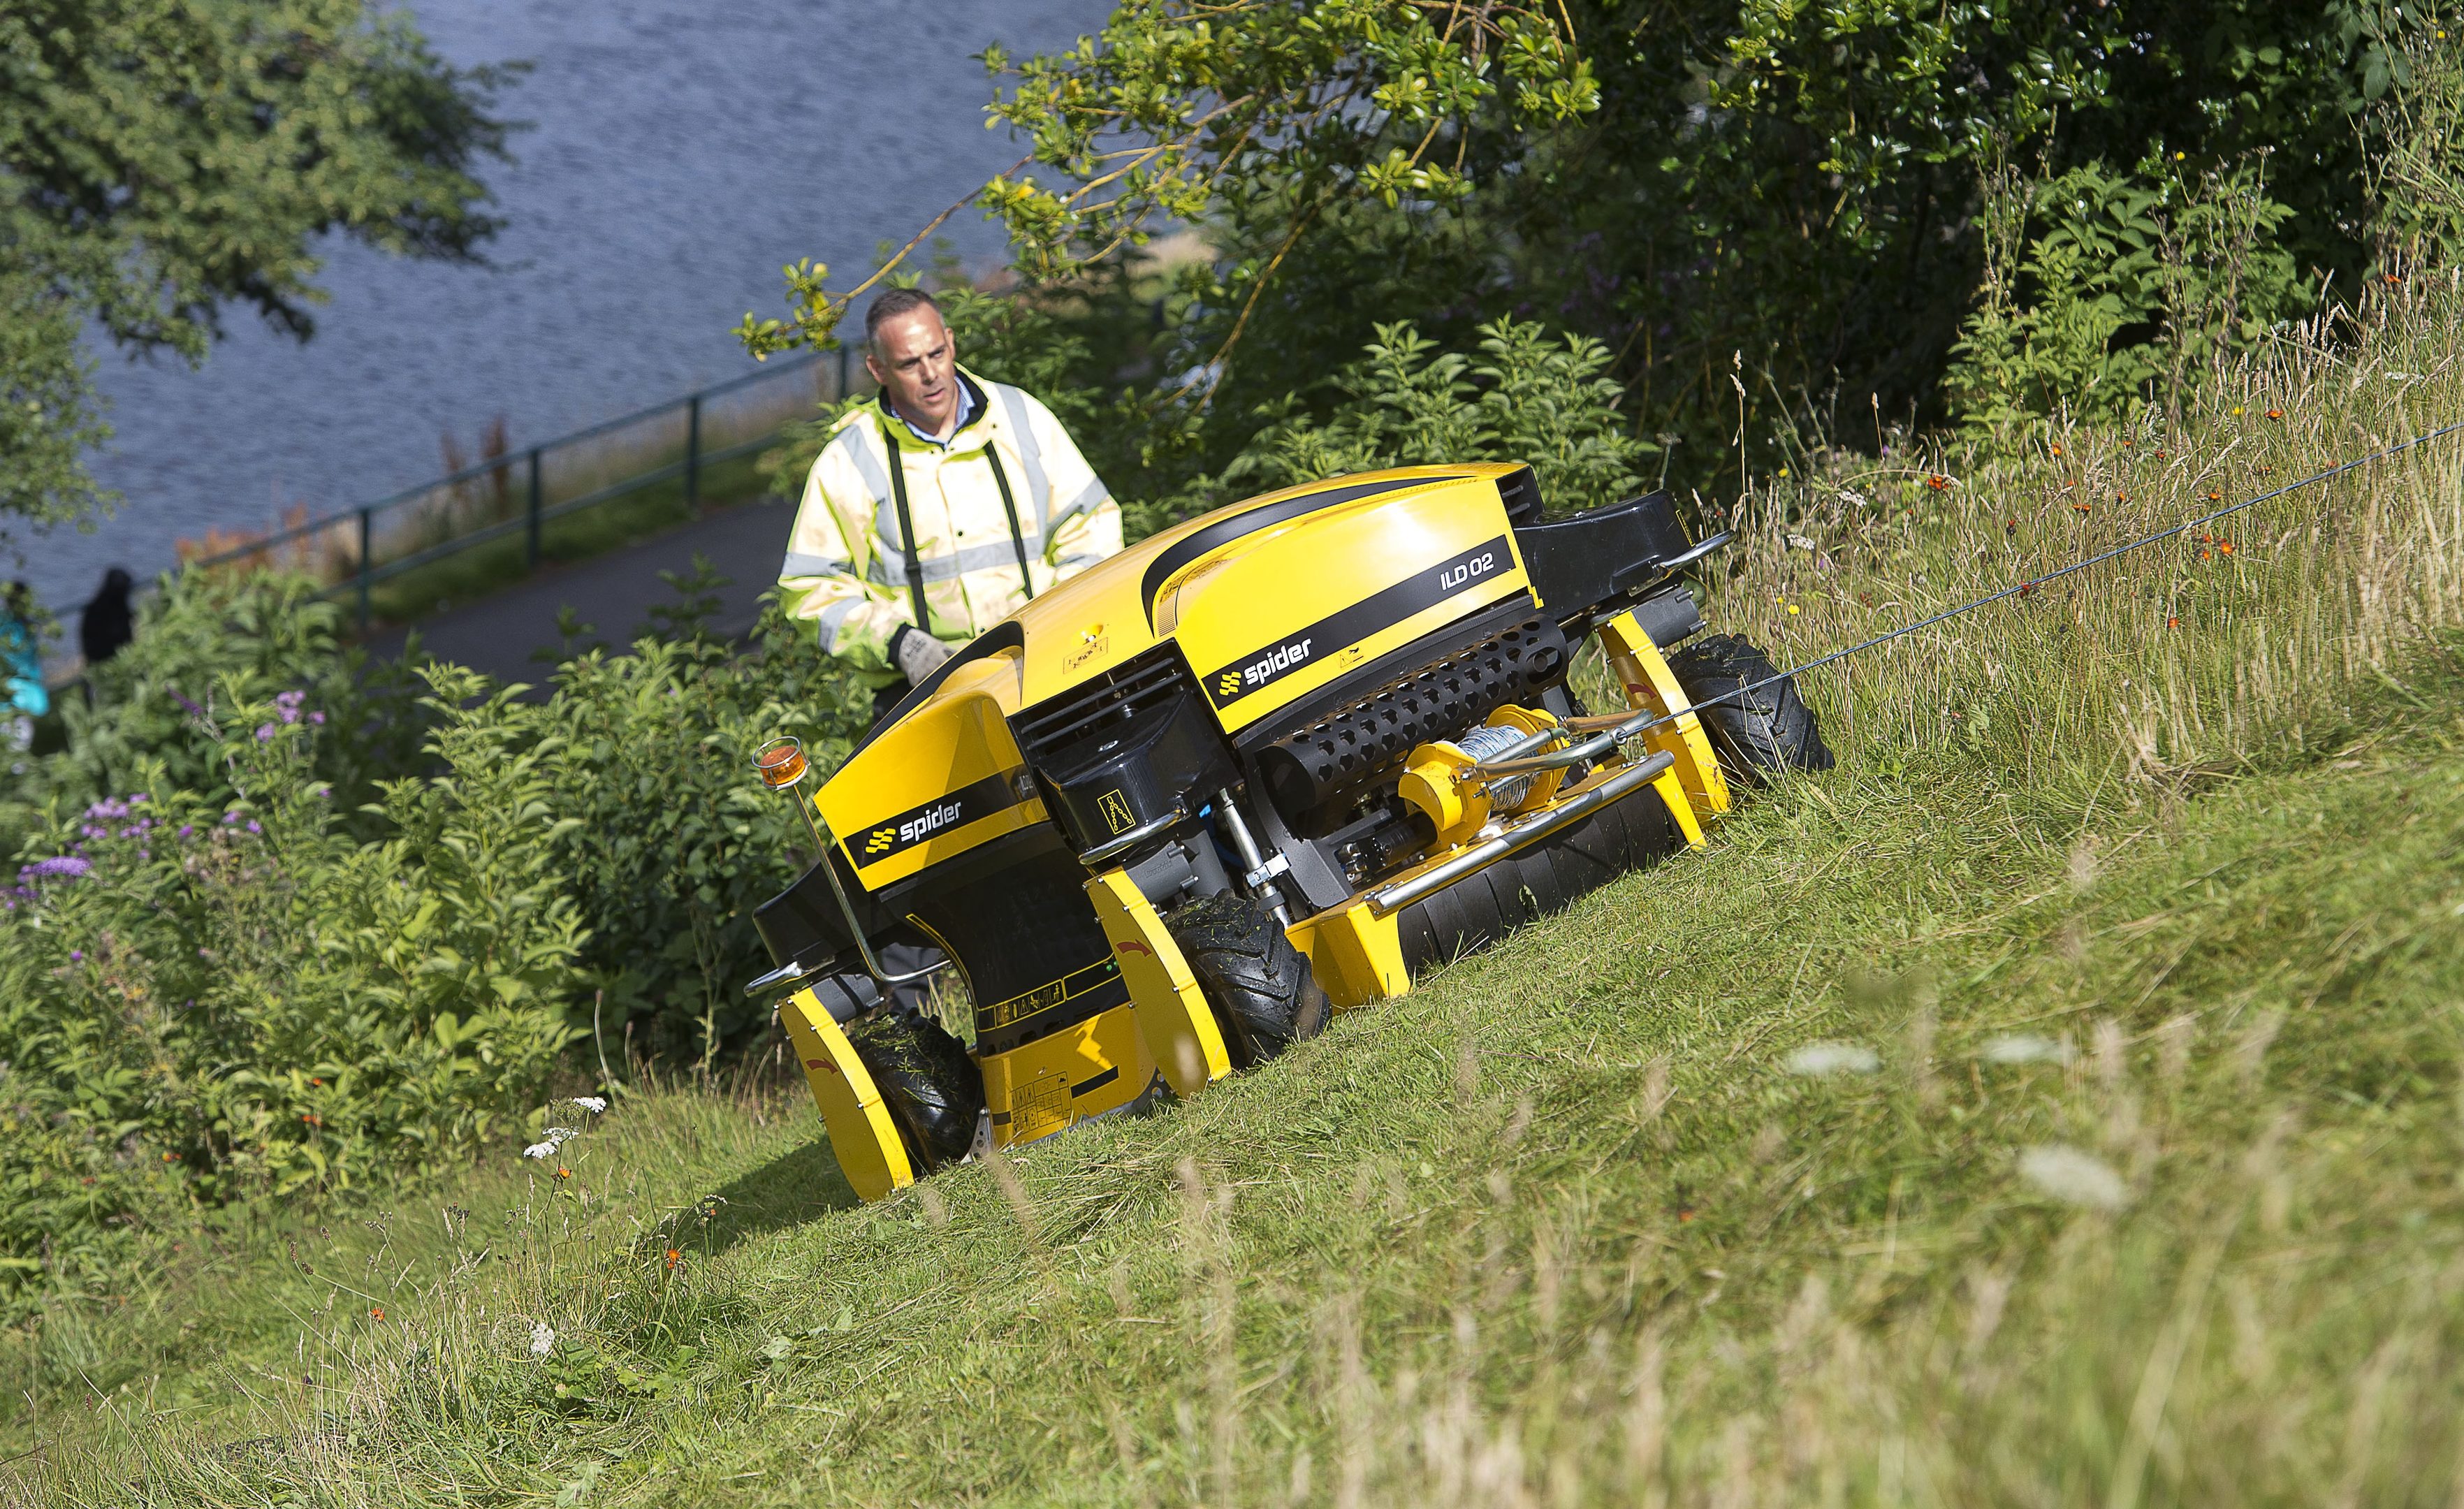 A remote control grass cutting machine (“Spider”) is to be tested on the steep Inverness Castle Banks (Trevor Martin)